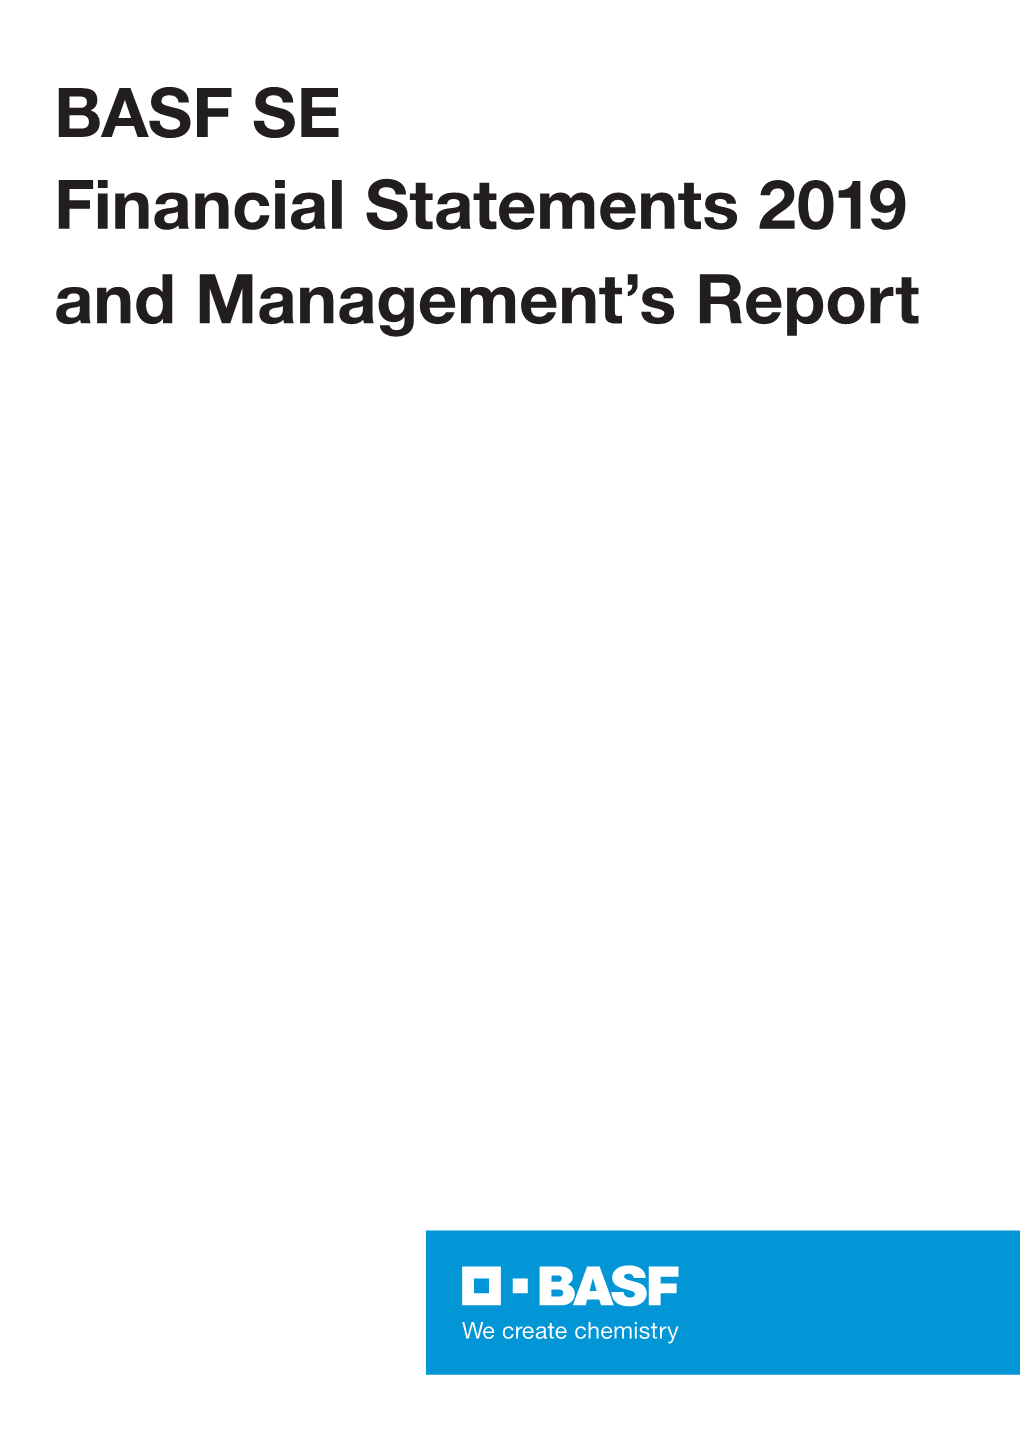 BASF SE Financial Statements 2019 and Management's Report